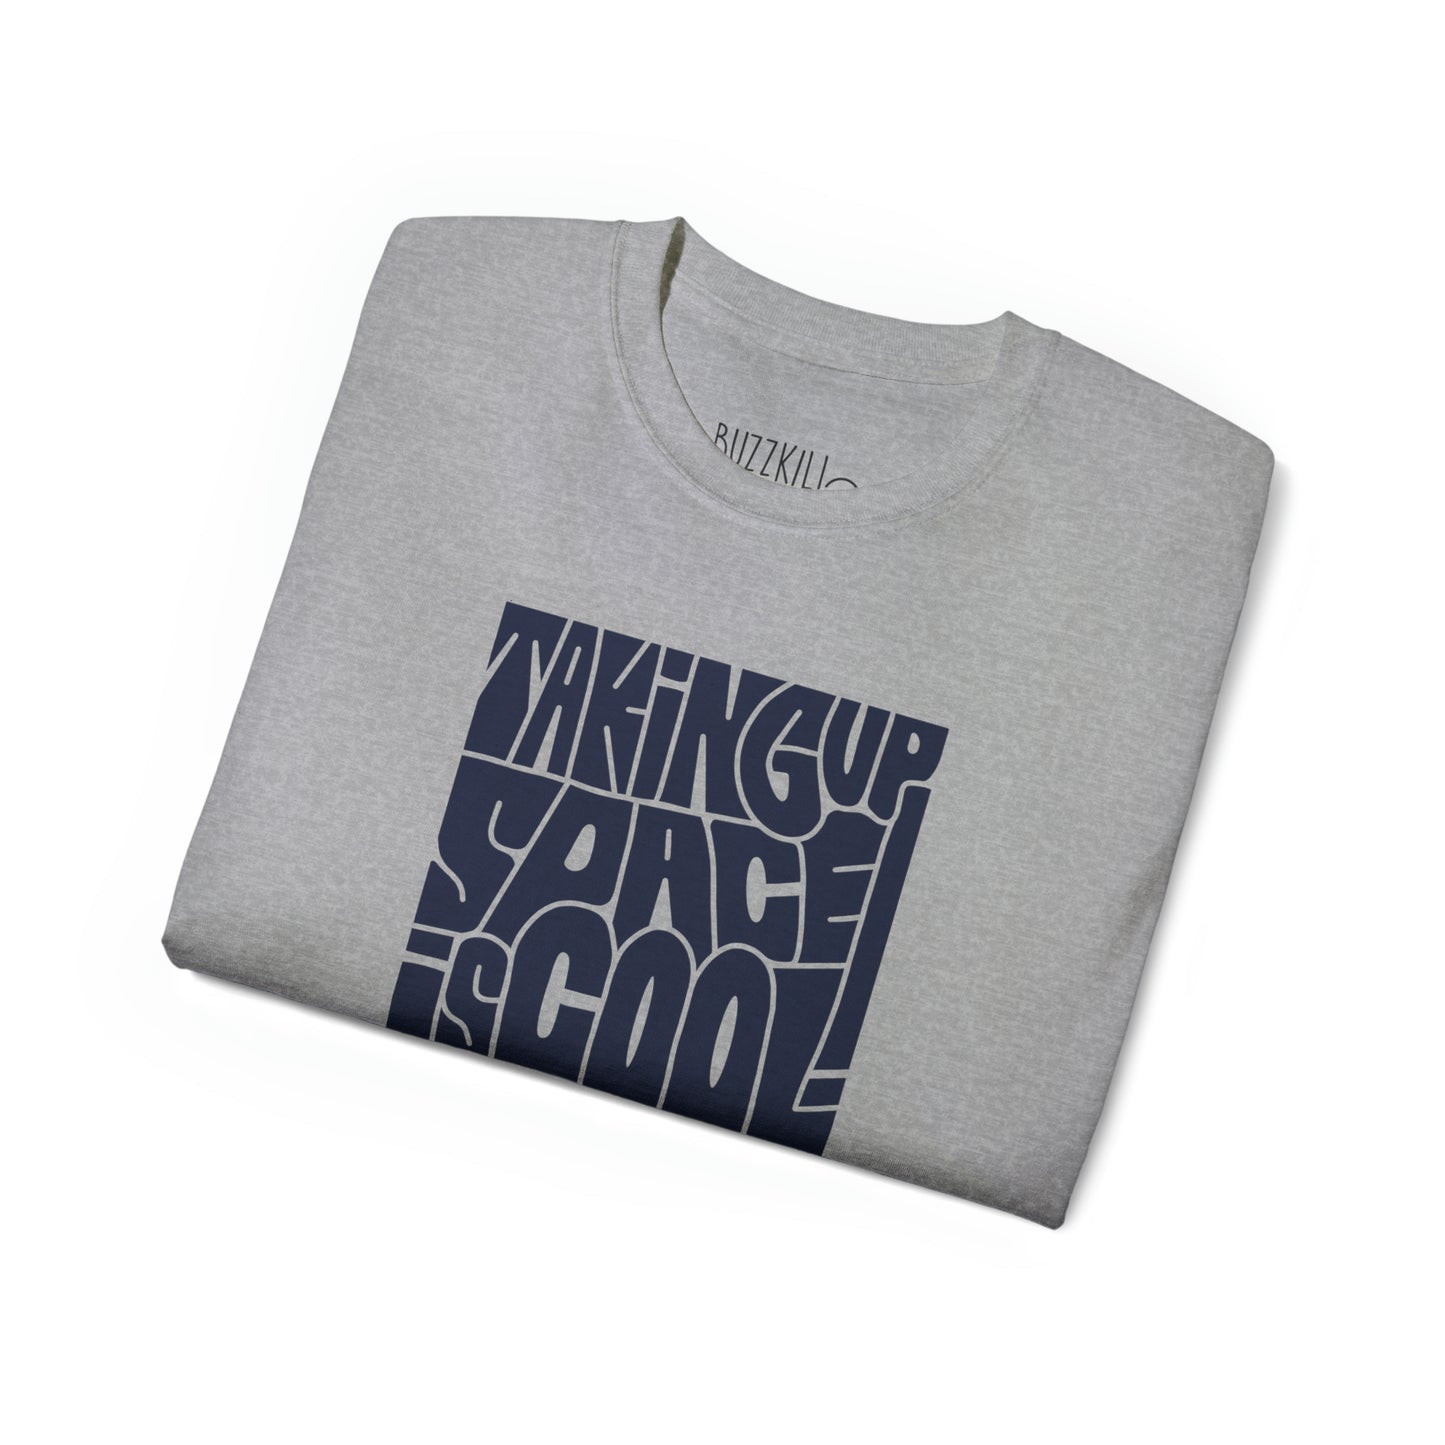 Taking Up Space Is Cool - Unisex Ultra Cotton Tee